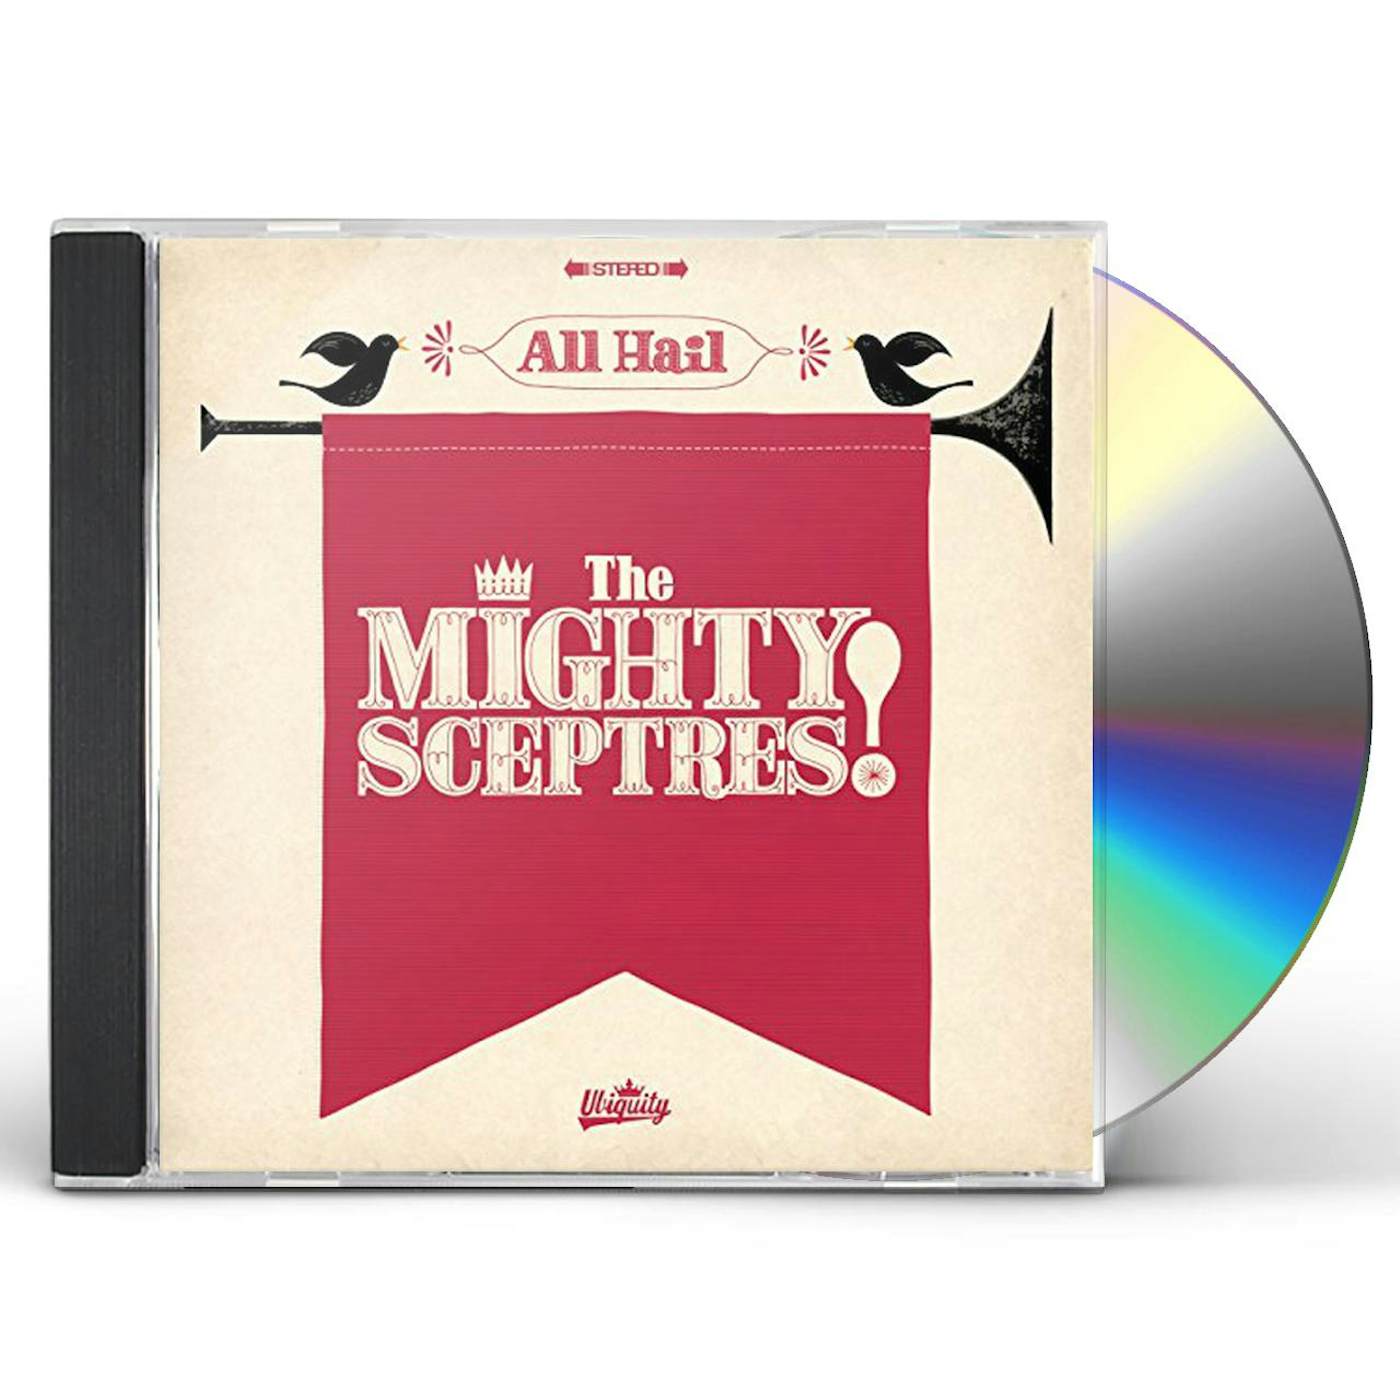 ALL HAIL THE MIGHTY SCEPTRES CD